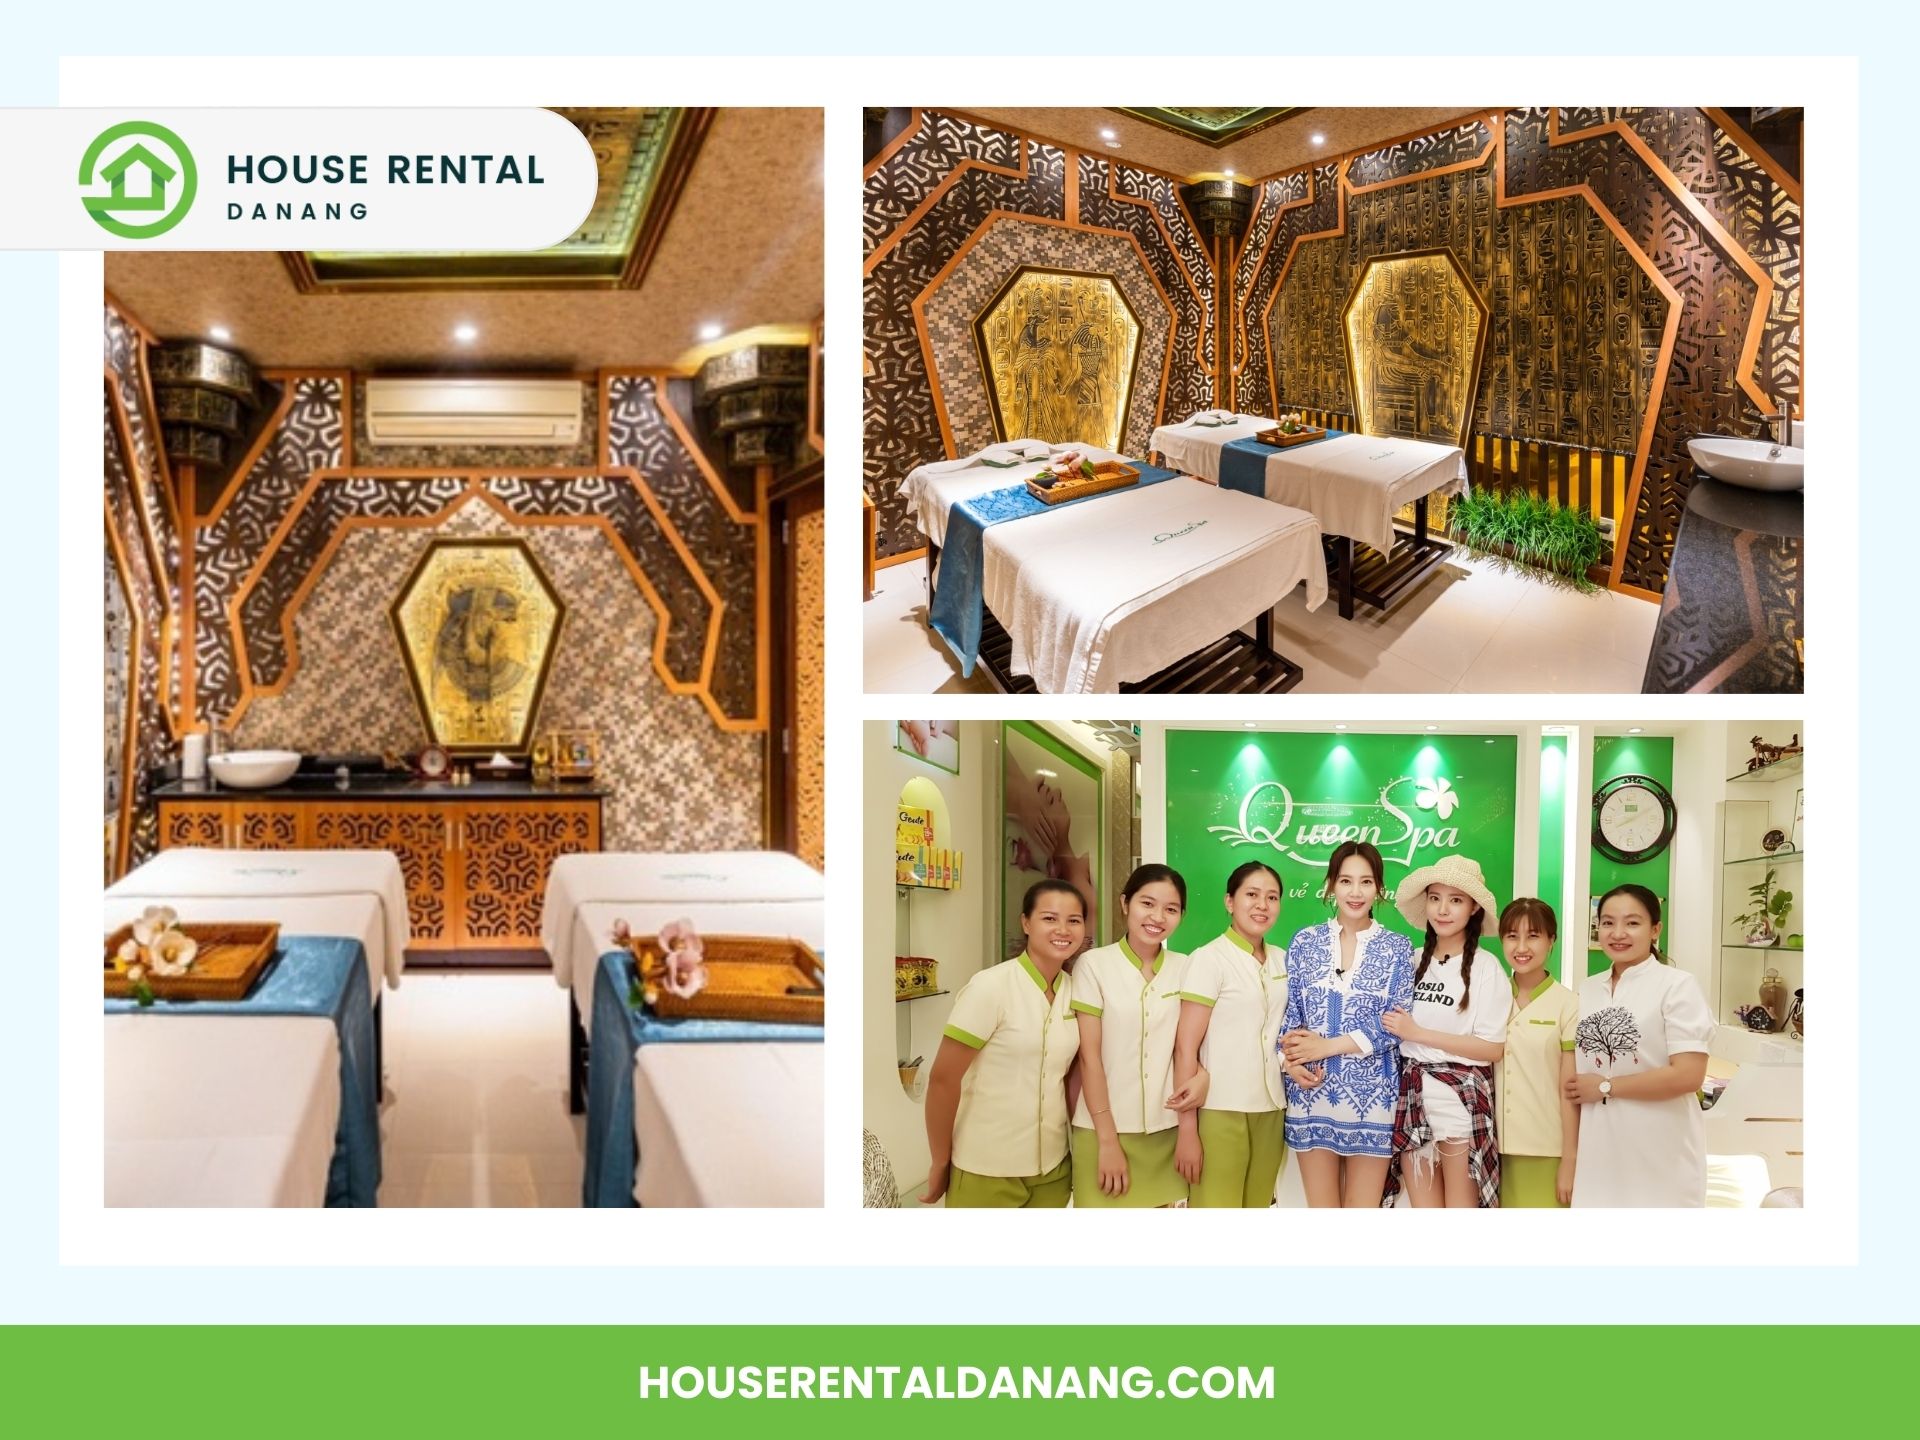 A collage showcasing spa rooms with massage tables and intricate decor, alongside a group photo of five women in spa uniforms standing next to customers. Text reads "House Rental Danang" and "houserentaldanang.com," featuring some of the best Vietnamese spas in Da Nang.